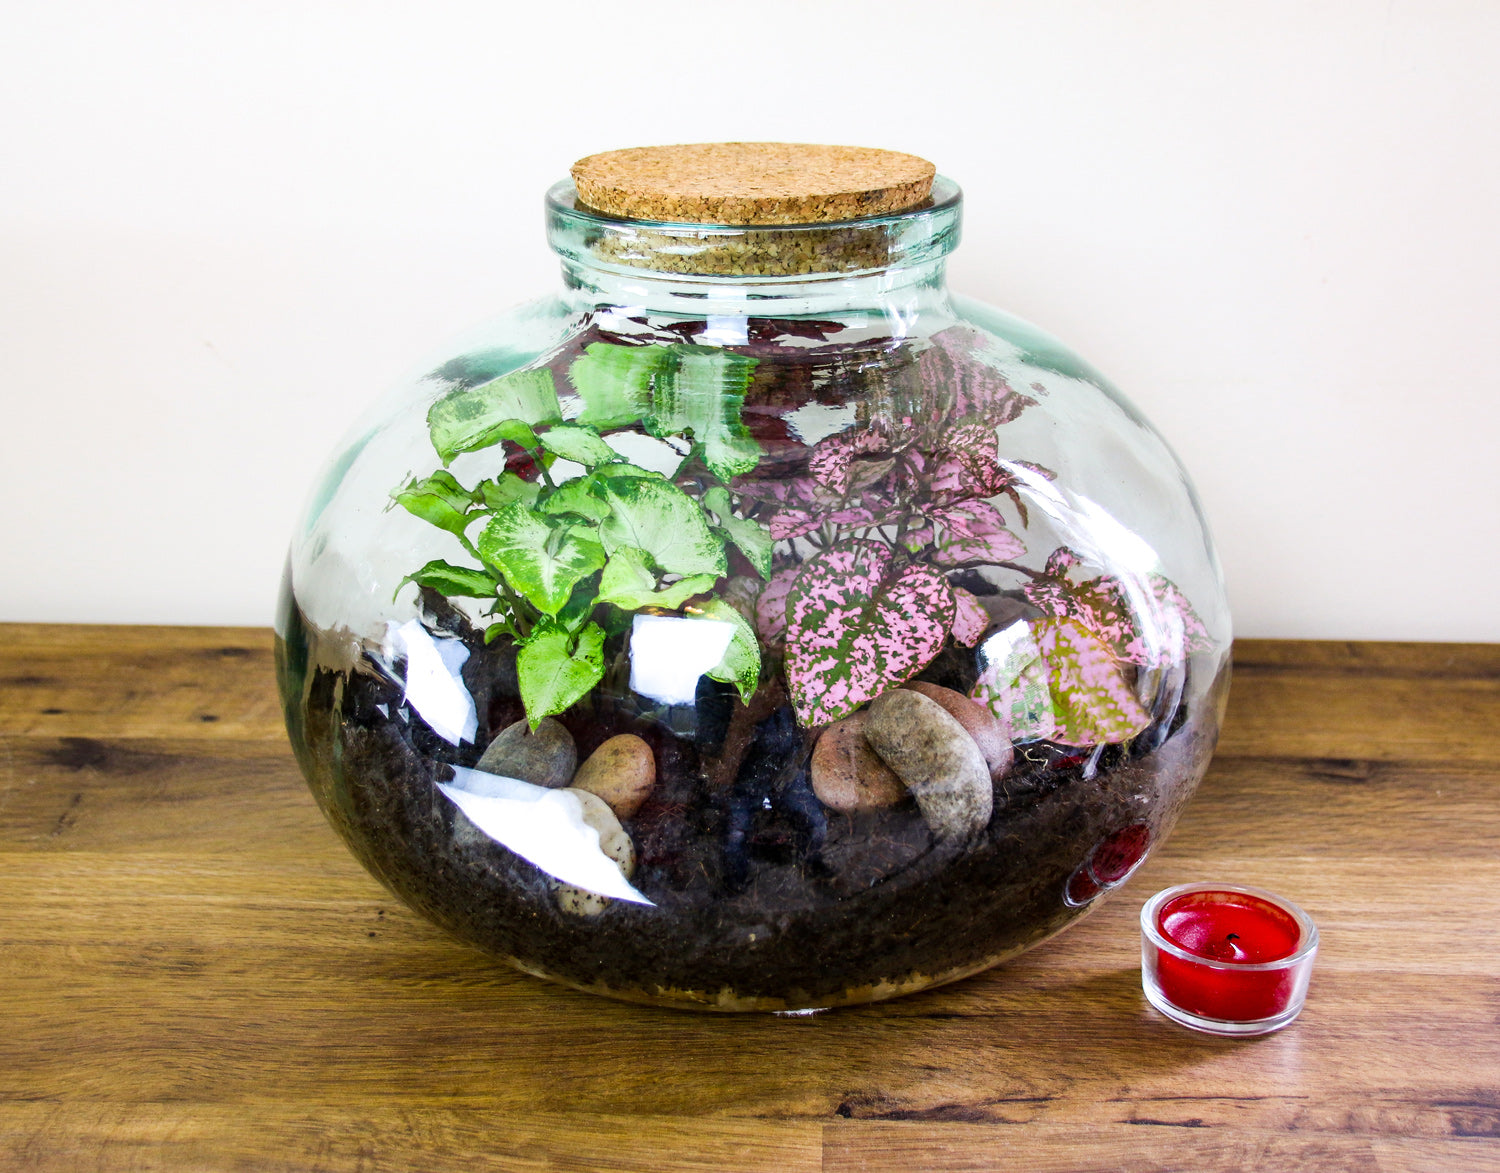 Terrarium kit with soil, charcoal and stones